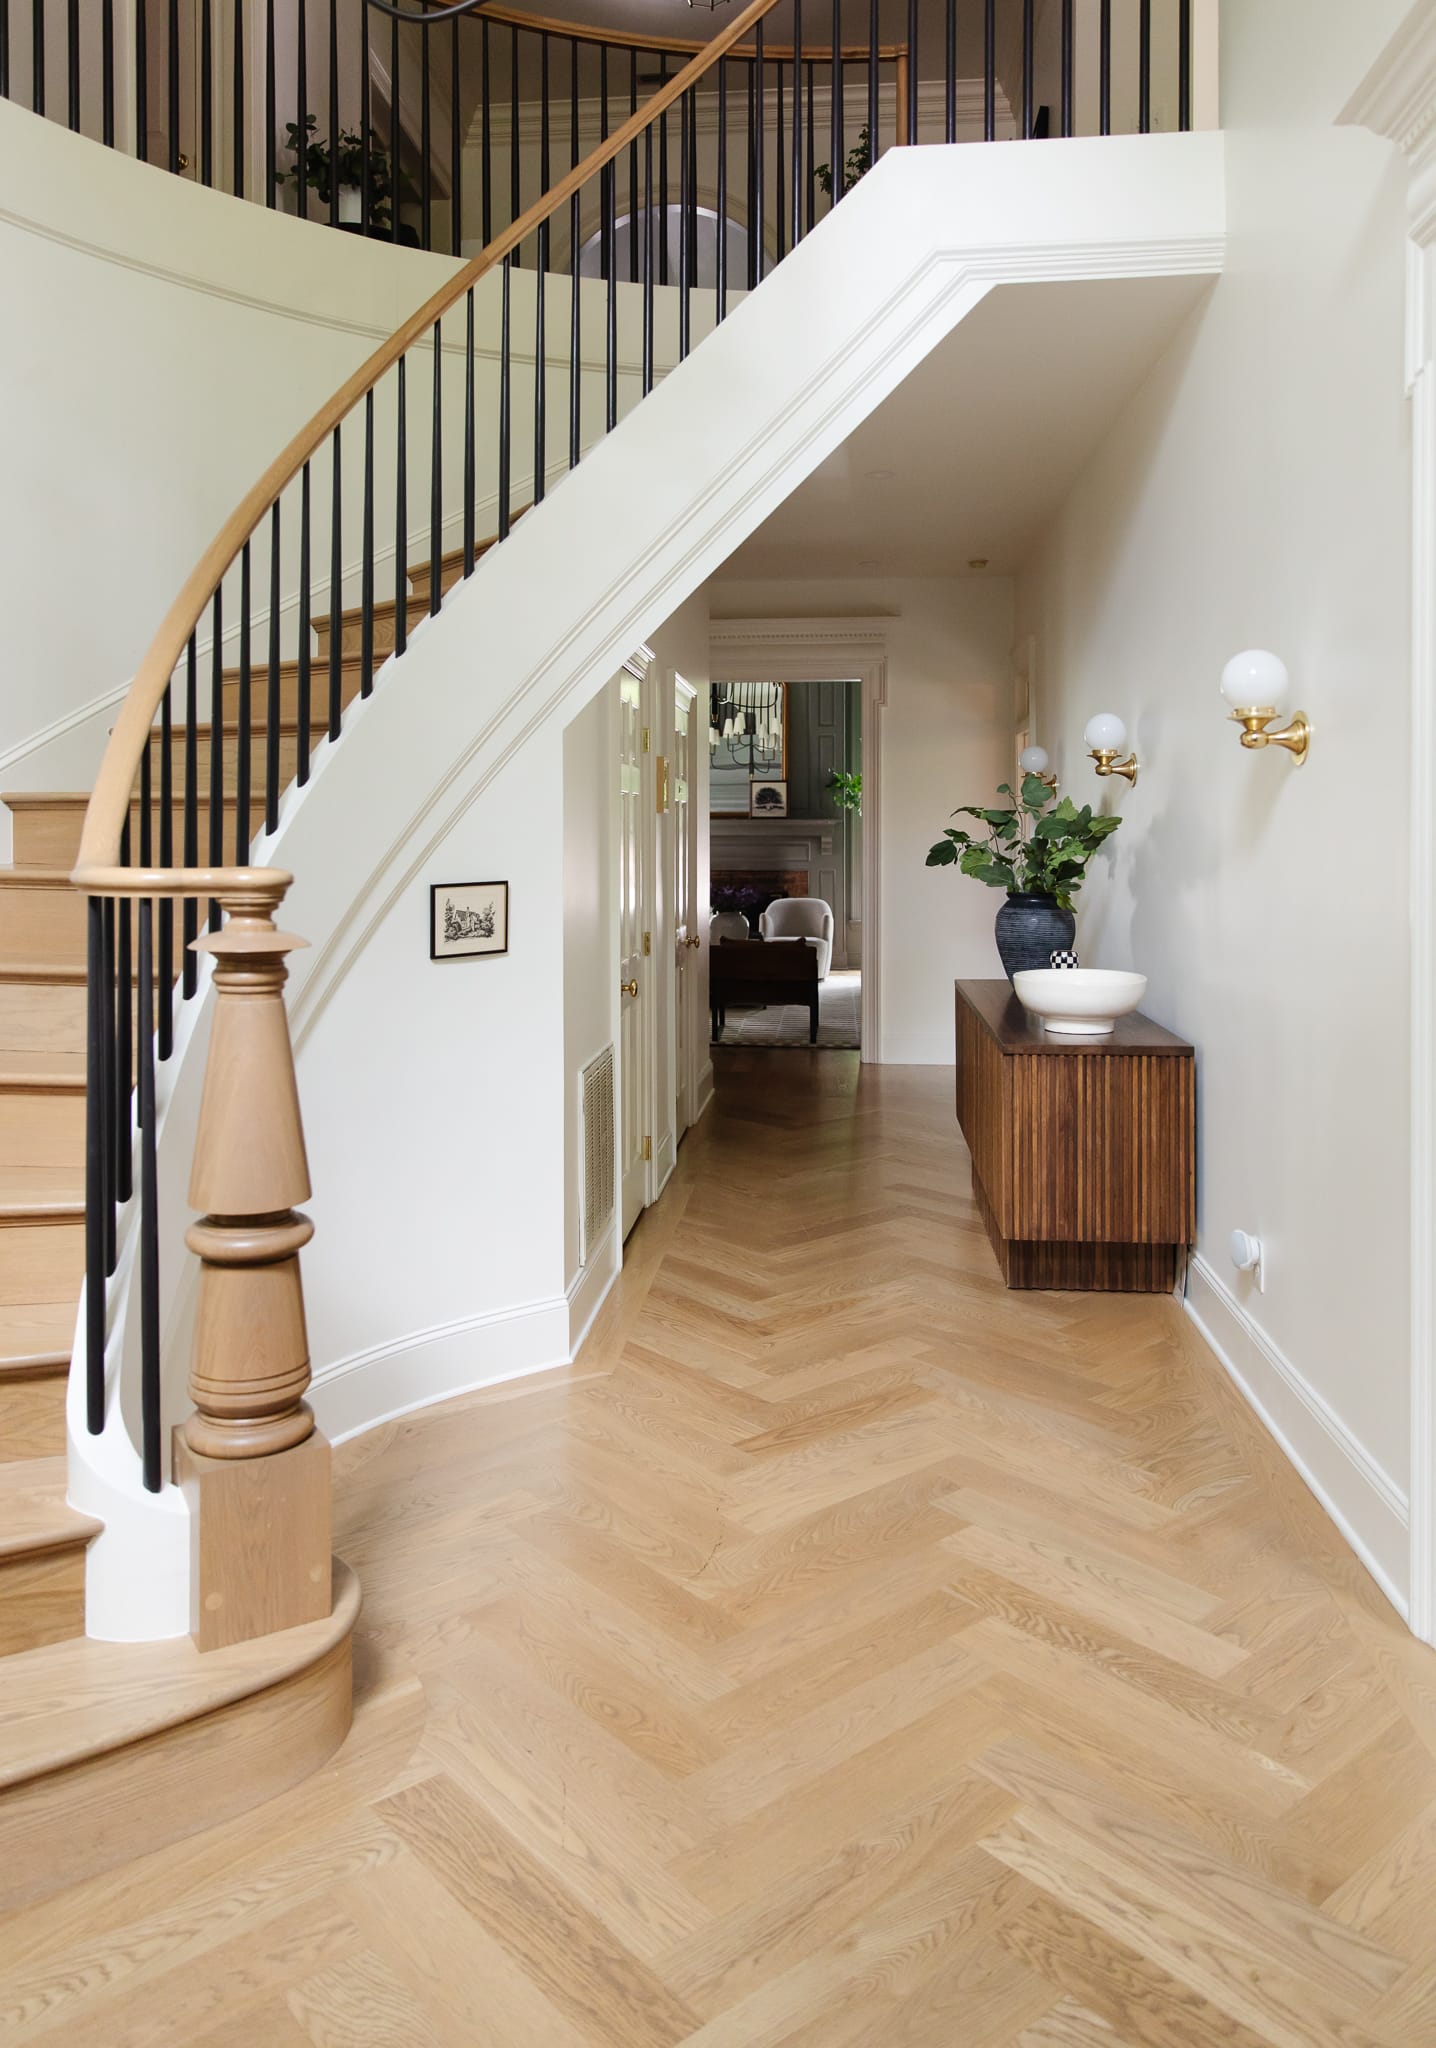 Chris Loves Julia | The entryway and grand staircase